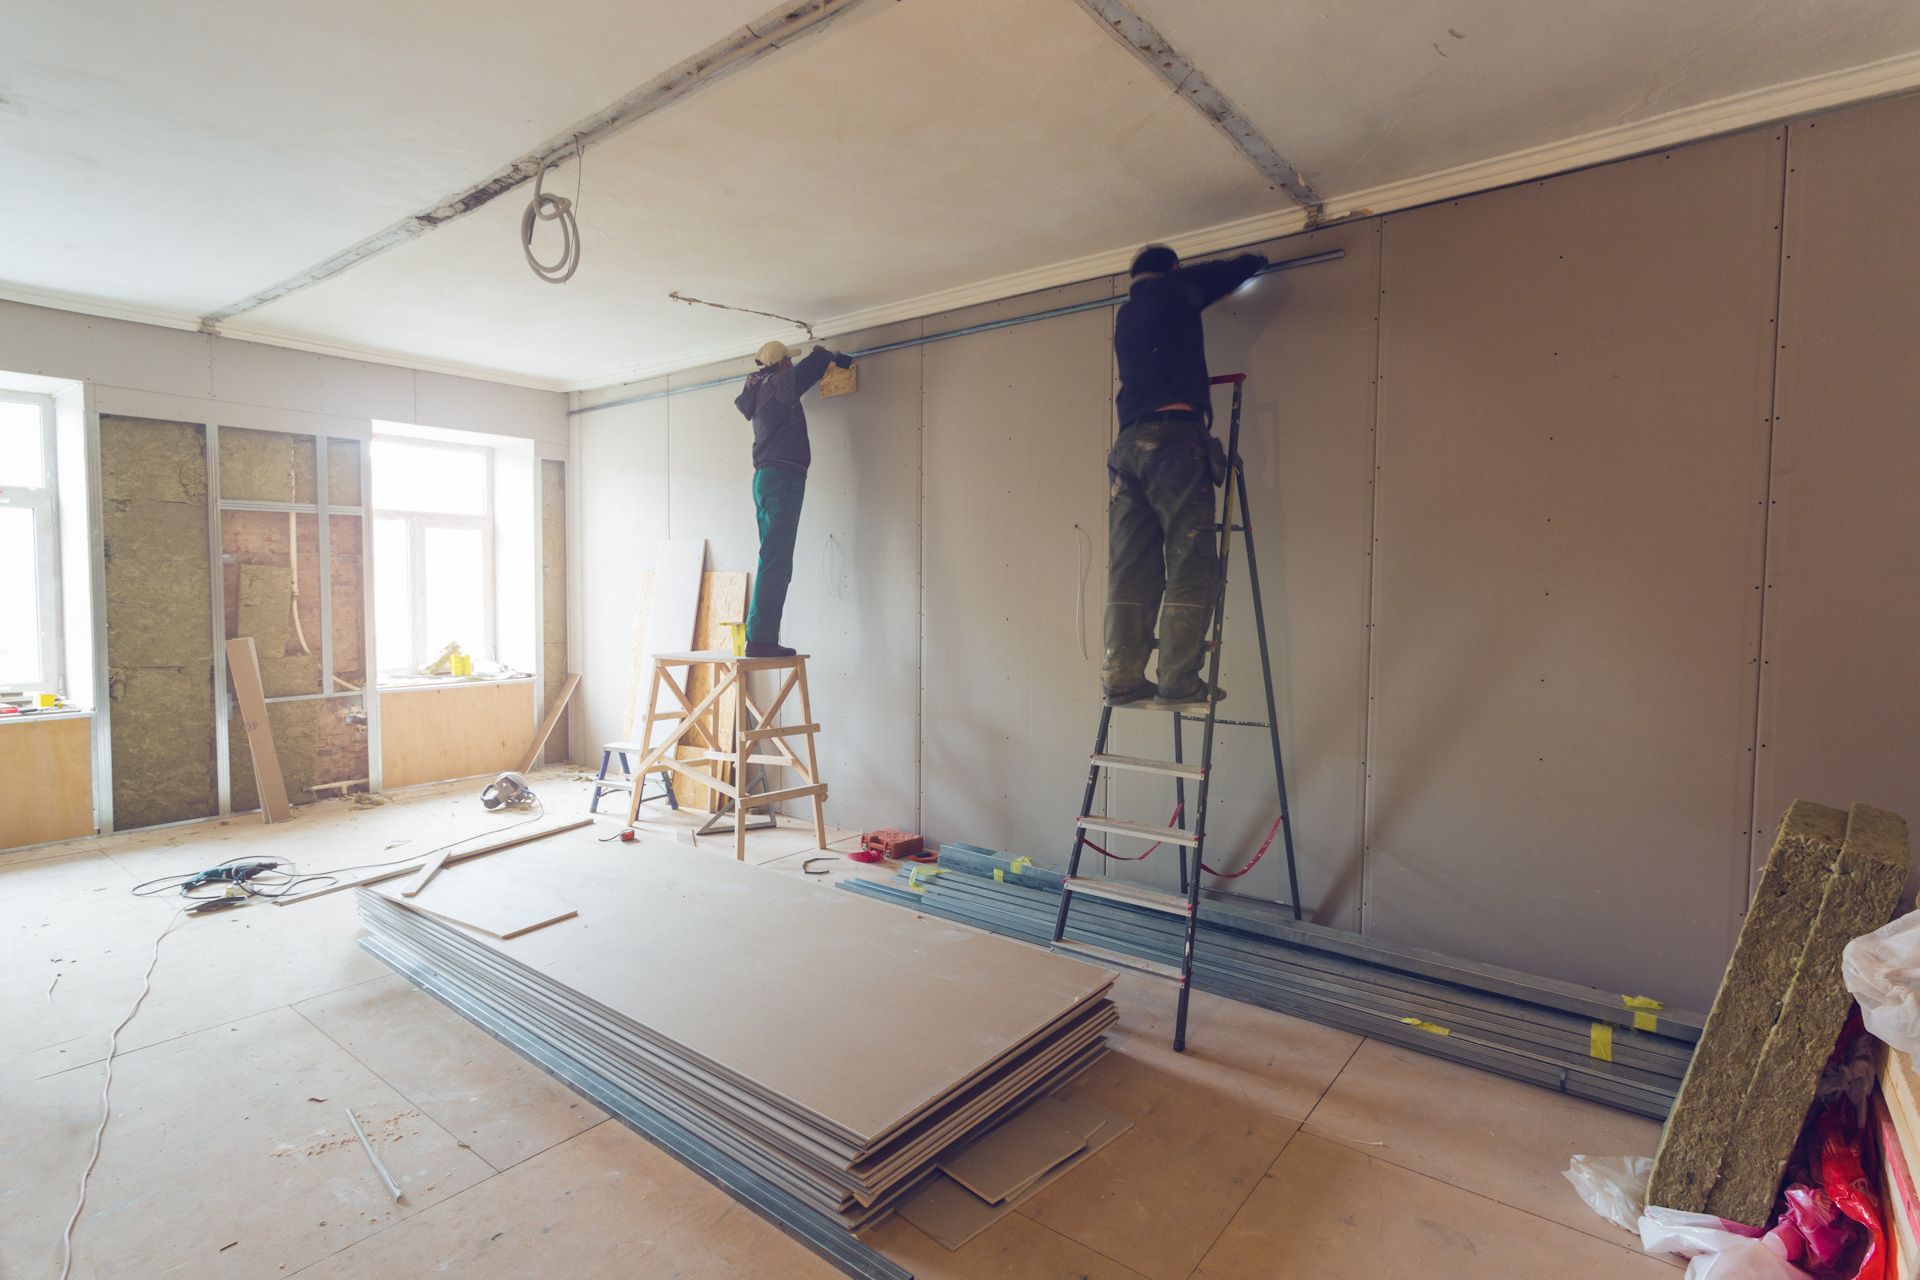 Two men are working on a wall in an empty room